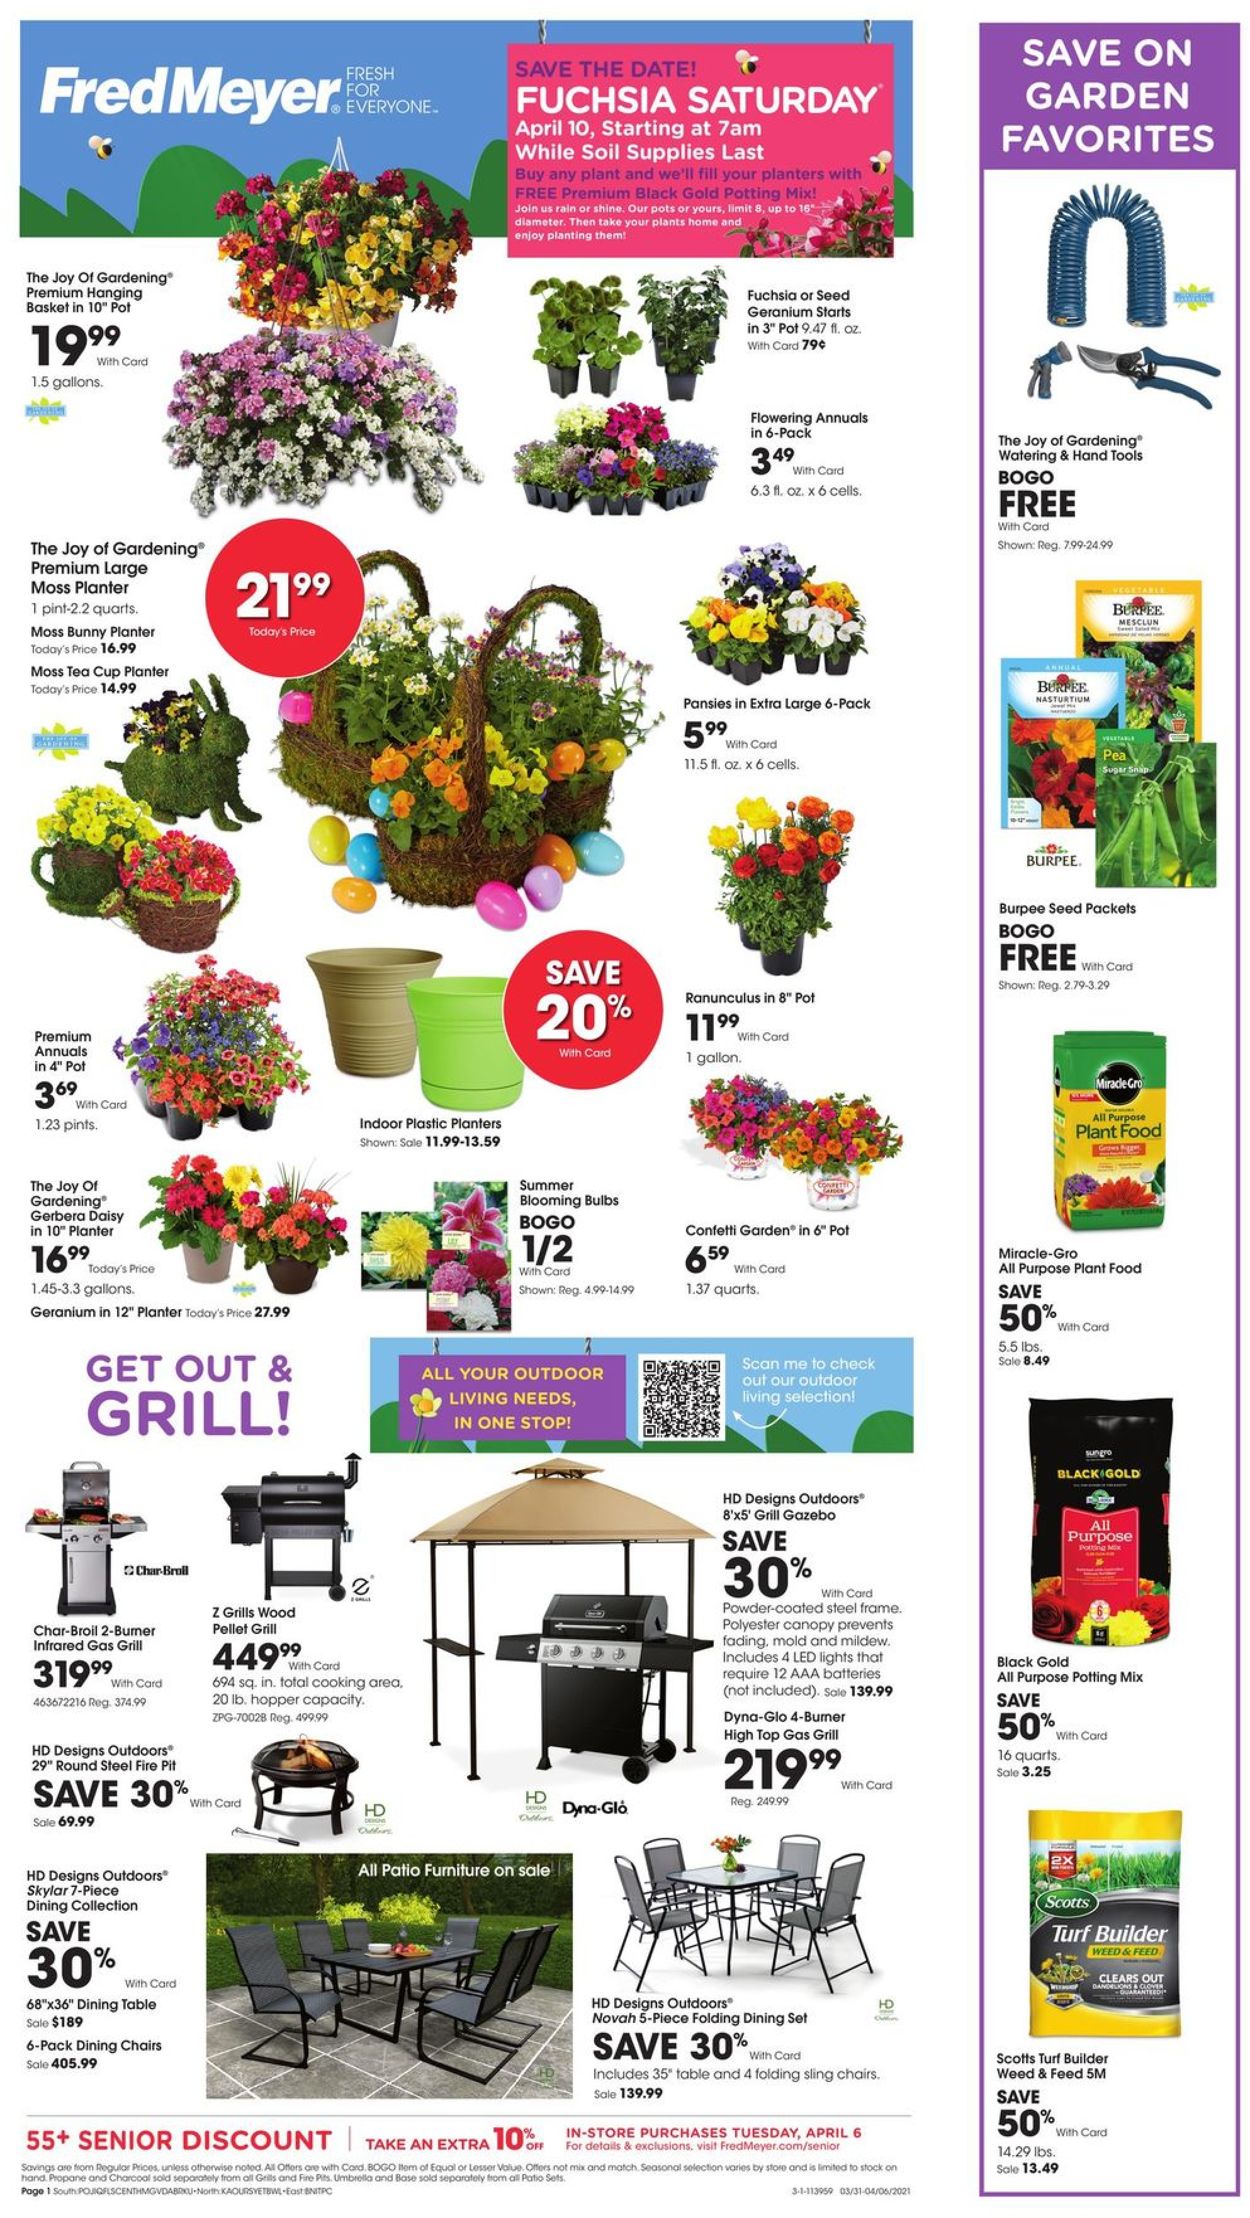 Fred Meyer - Easter 2021 ad Weekly Ad Circular - valid 03/31-04/06/2021